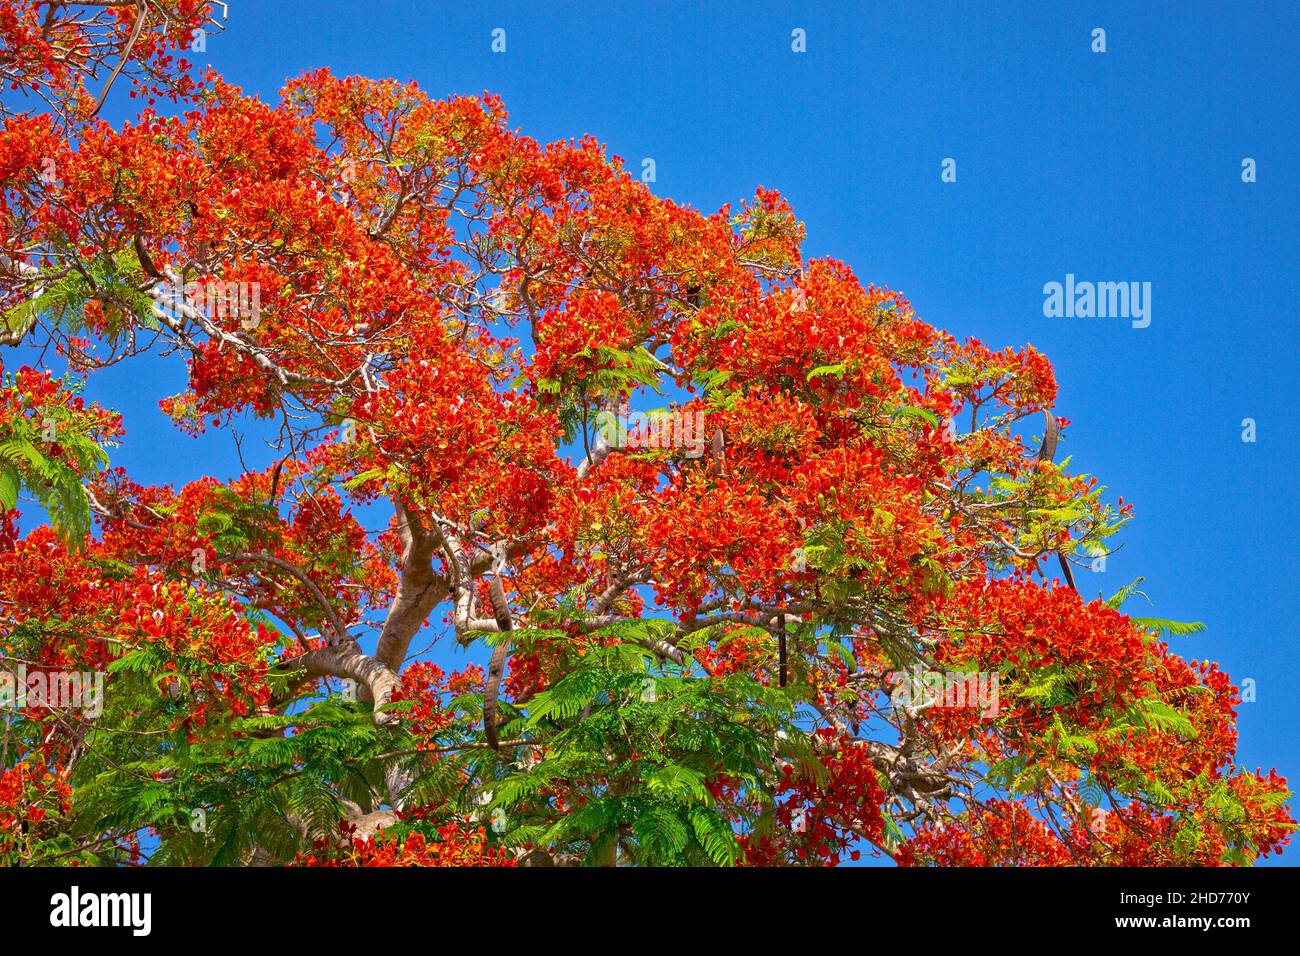 The Spanish call it Framboyan (flamboyant) and seeing a mature Royal Poinciana tree in full-bloom is a breath-taking sight. The Royal Poinciana is a Stock Photo